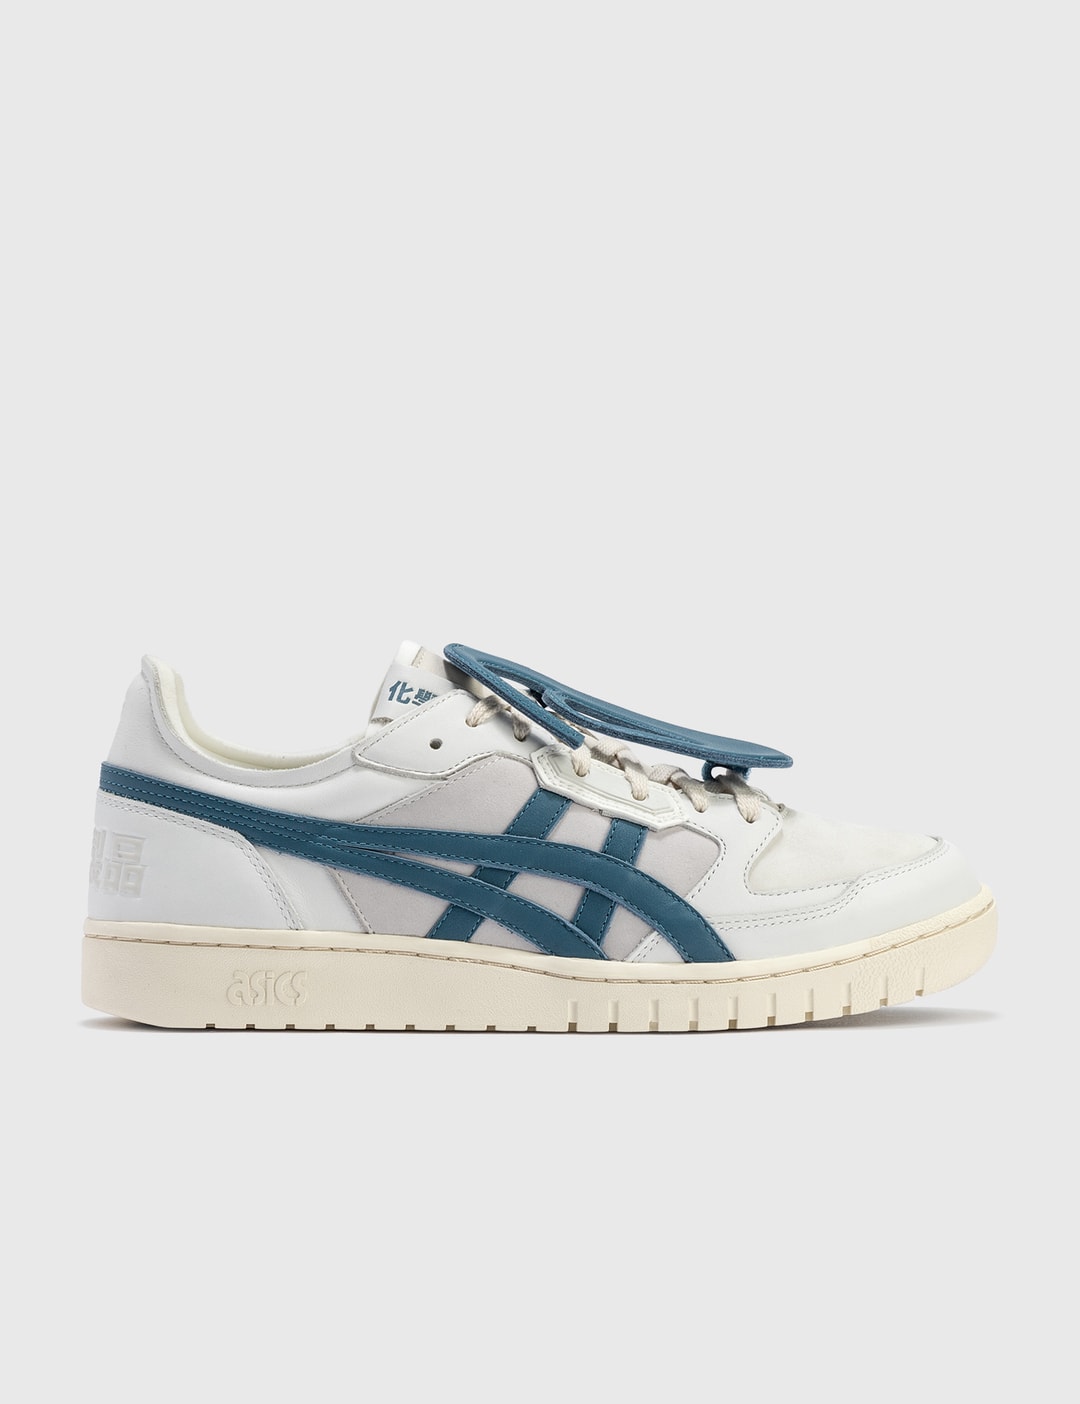 Asics - Asics X C2H4 All Court Alpha-S | HBX - Globally Curated Fashion and by Hypebeast